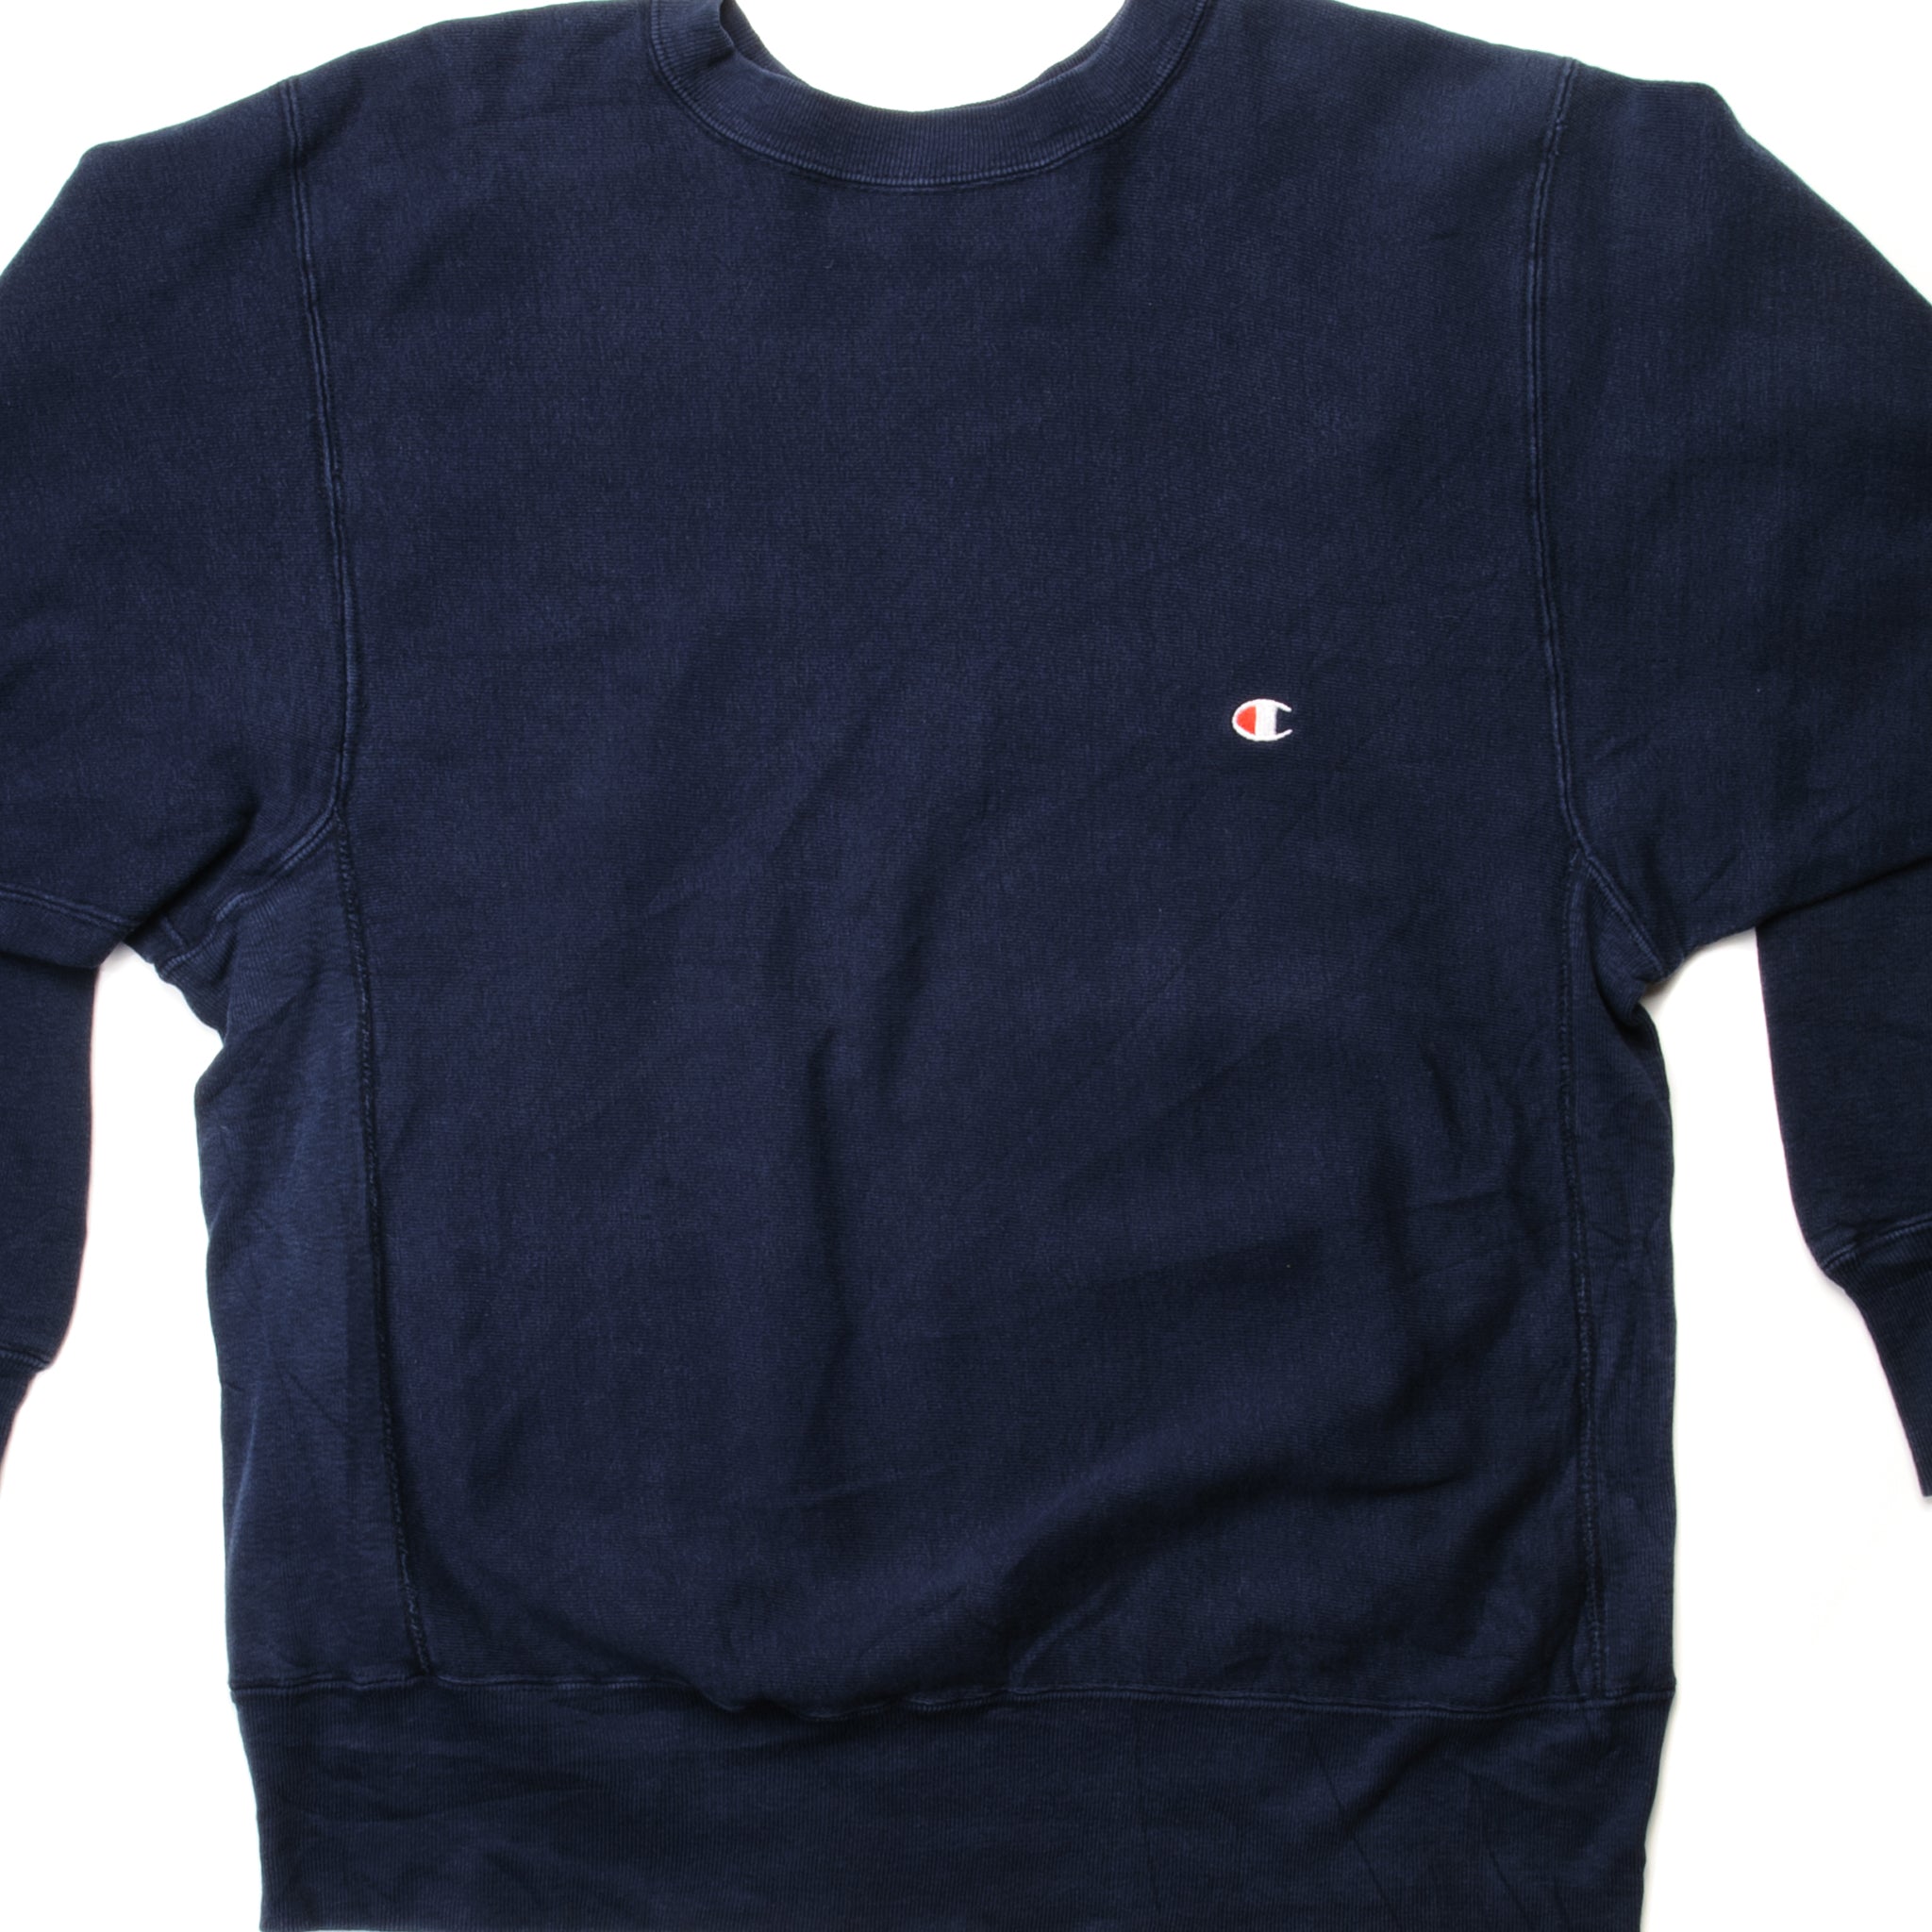 VINTAGE CHAMPION REVERSE WEAVE SWEATSHIRT EARLY 1980S-1990 LARGE MADE ...